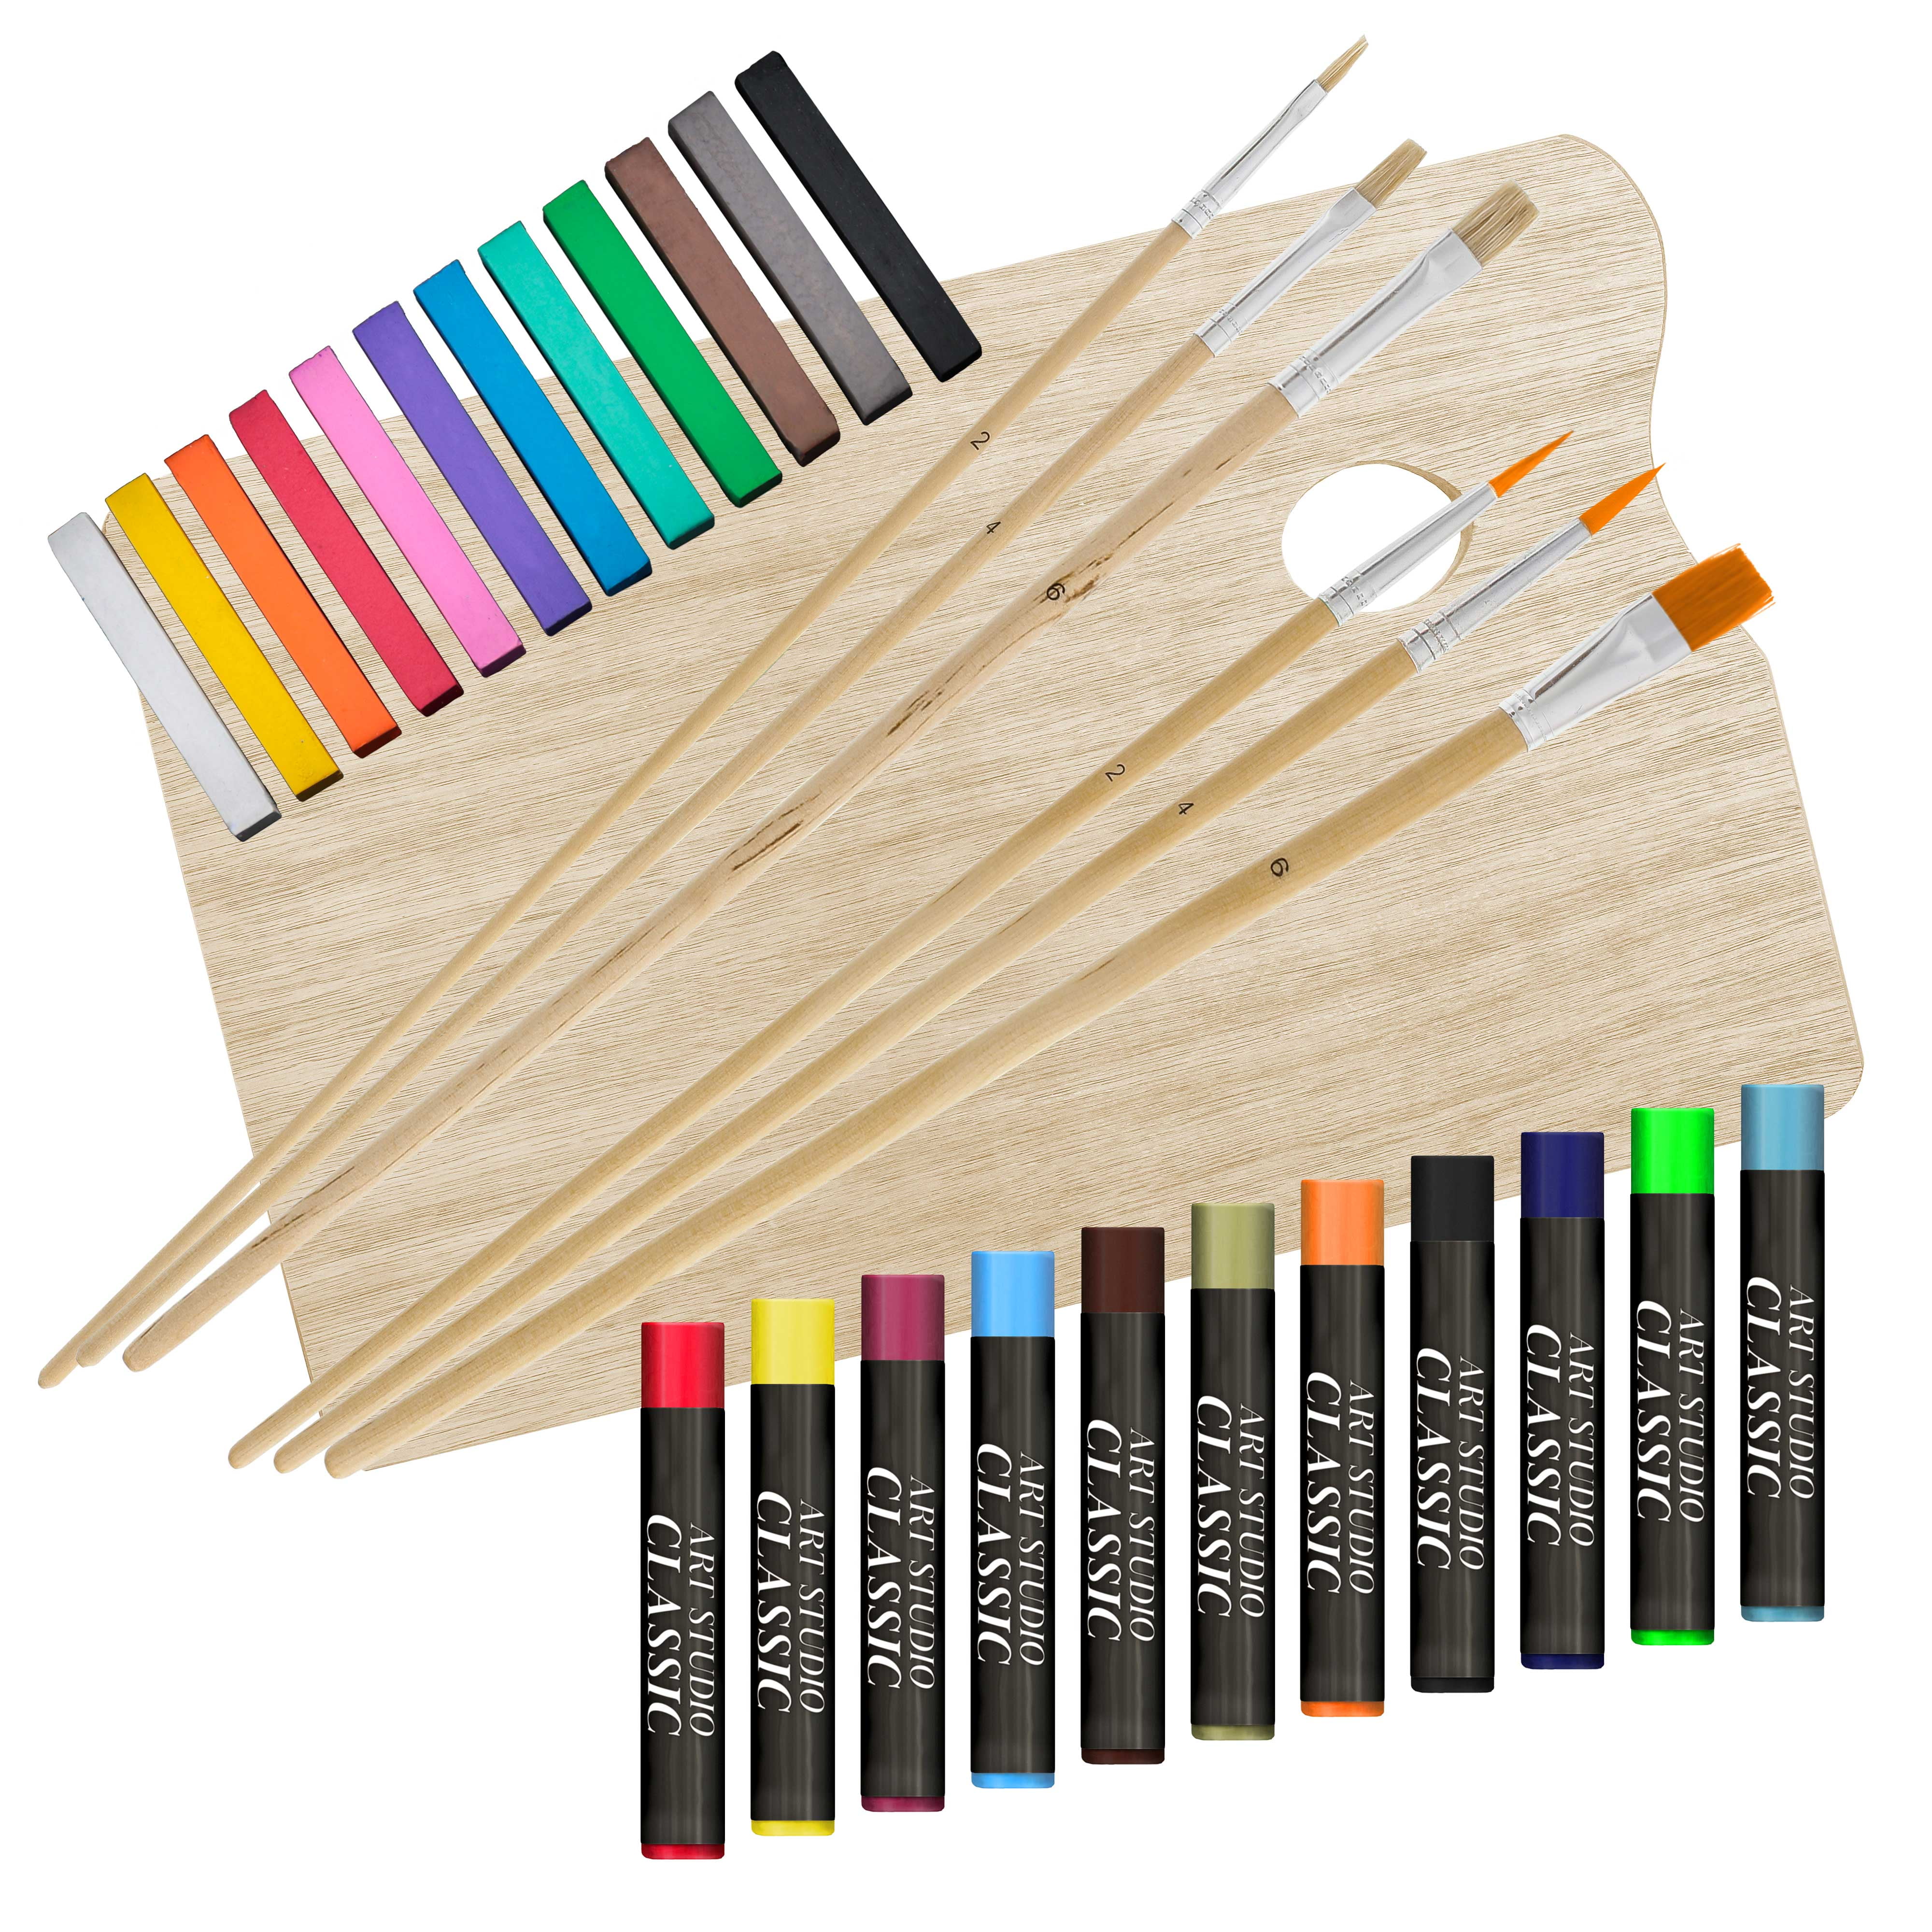 Painting Supplies Set, 49-Piece Watercolor Painting Kit with Adjustable Wooden Easel Box-24 Tubes of Watercolor Paints, 9 Paint Brushes, 3 Canvas Boar